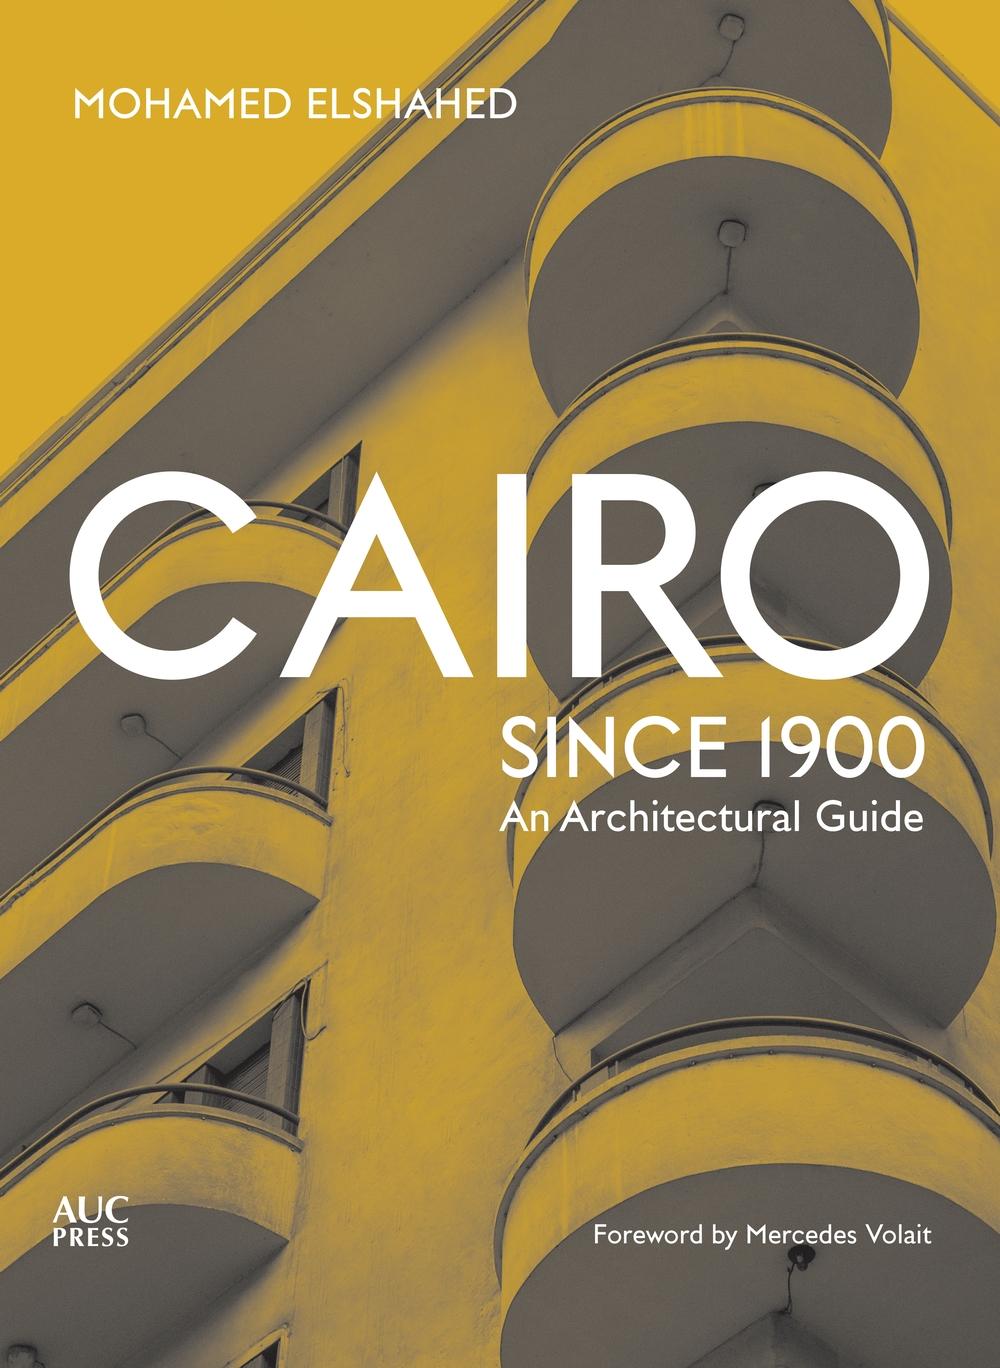 Cairo since 1900 - Mohamed Elshahed